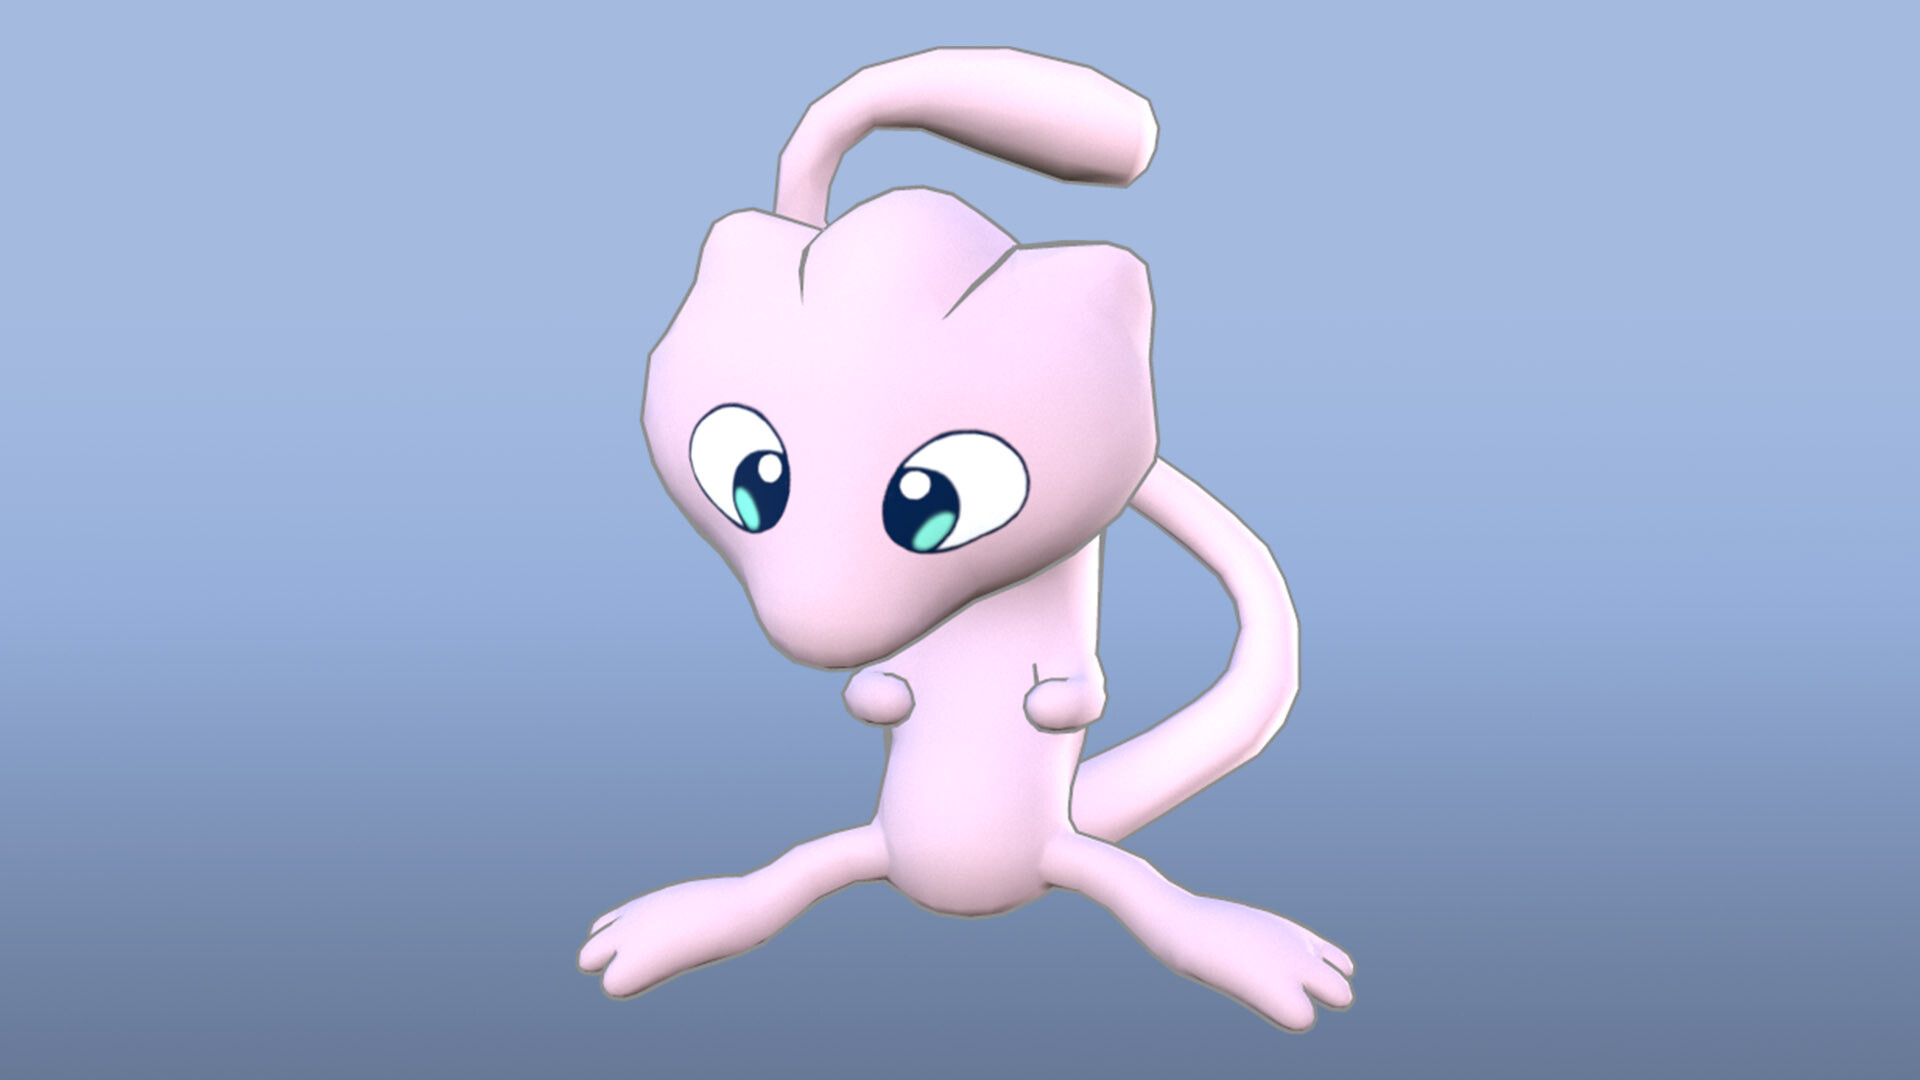 3D Model of the original sprite for Mew from the first Pokemon game. 